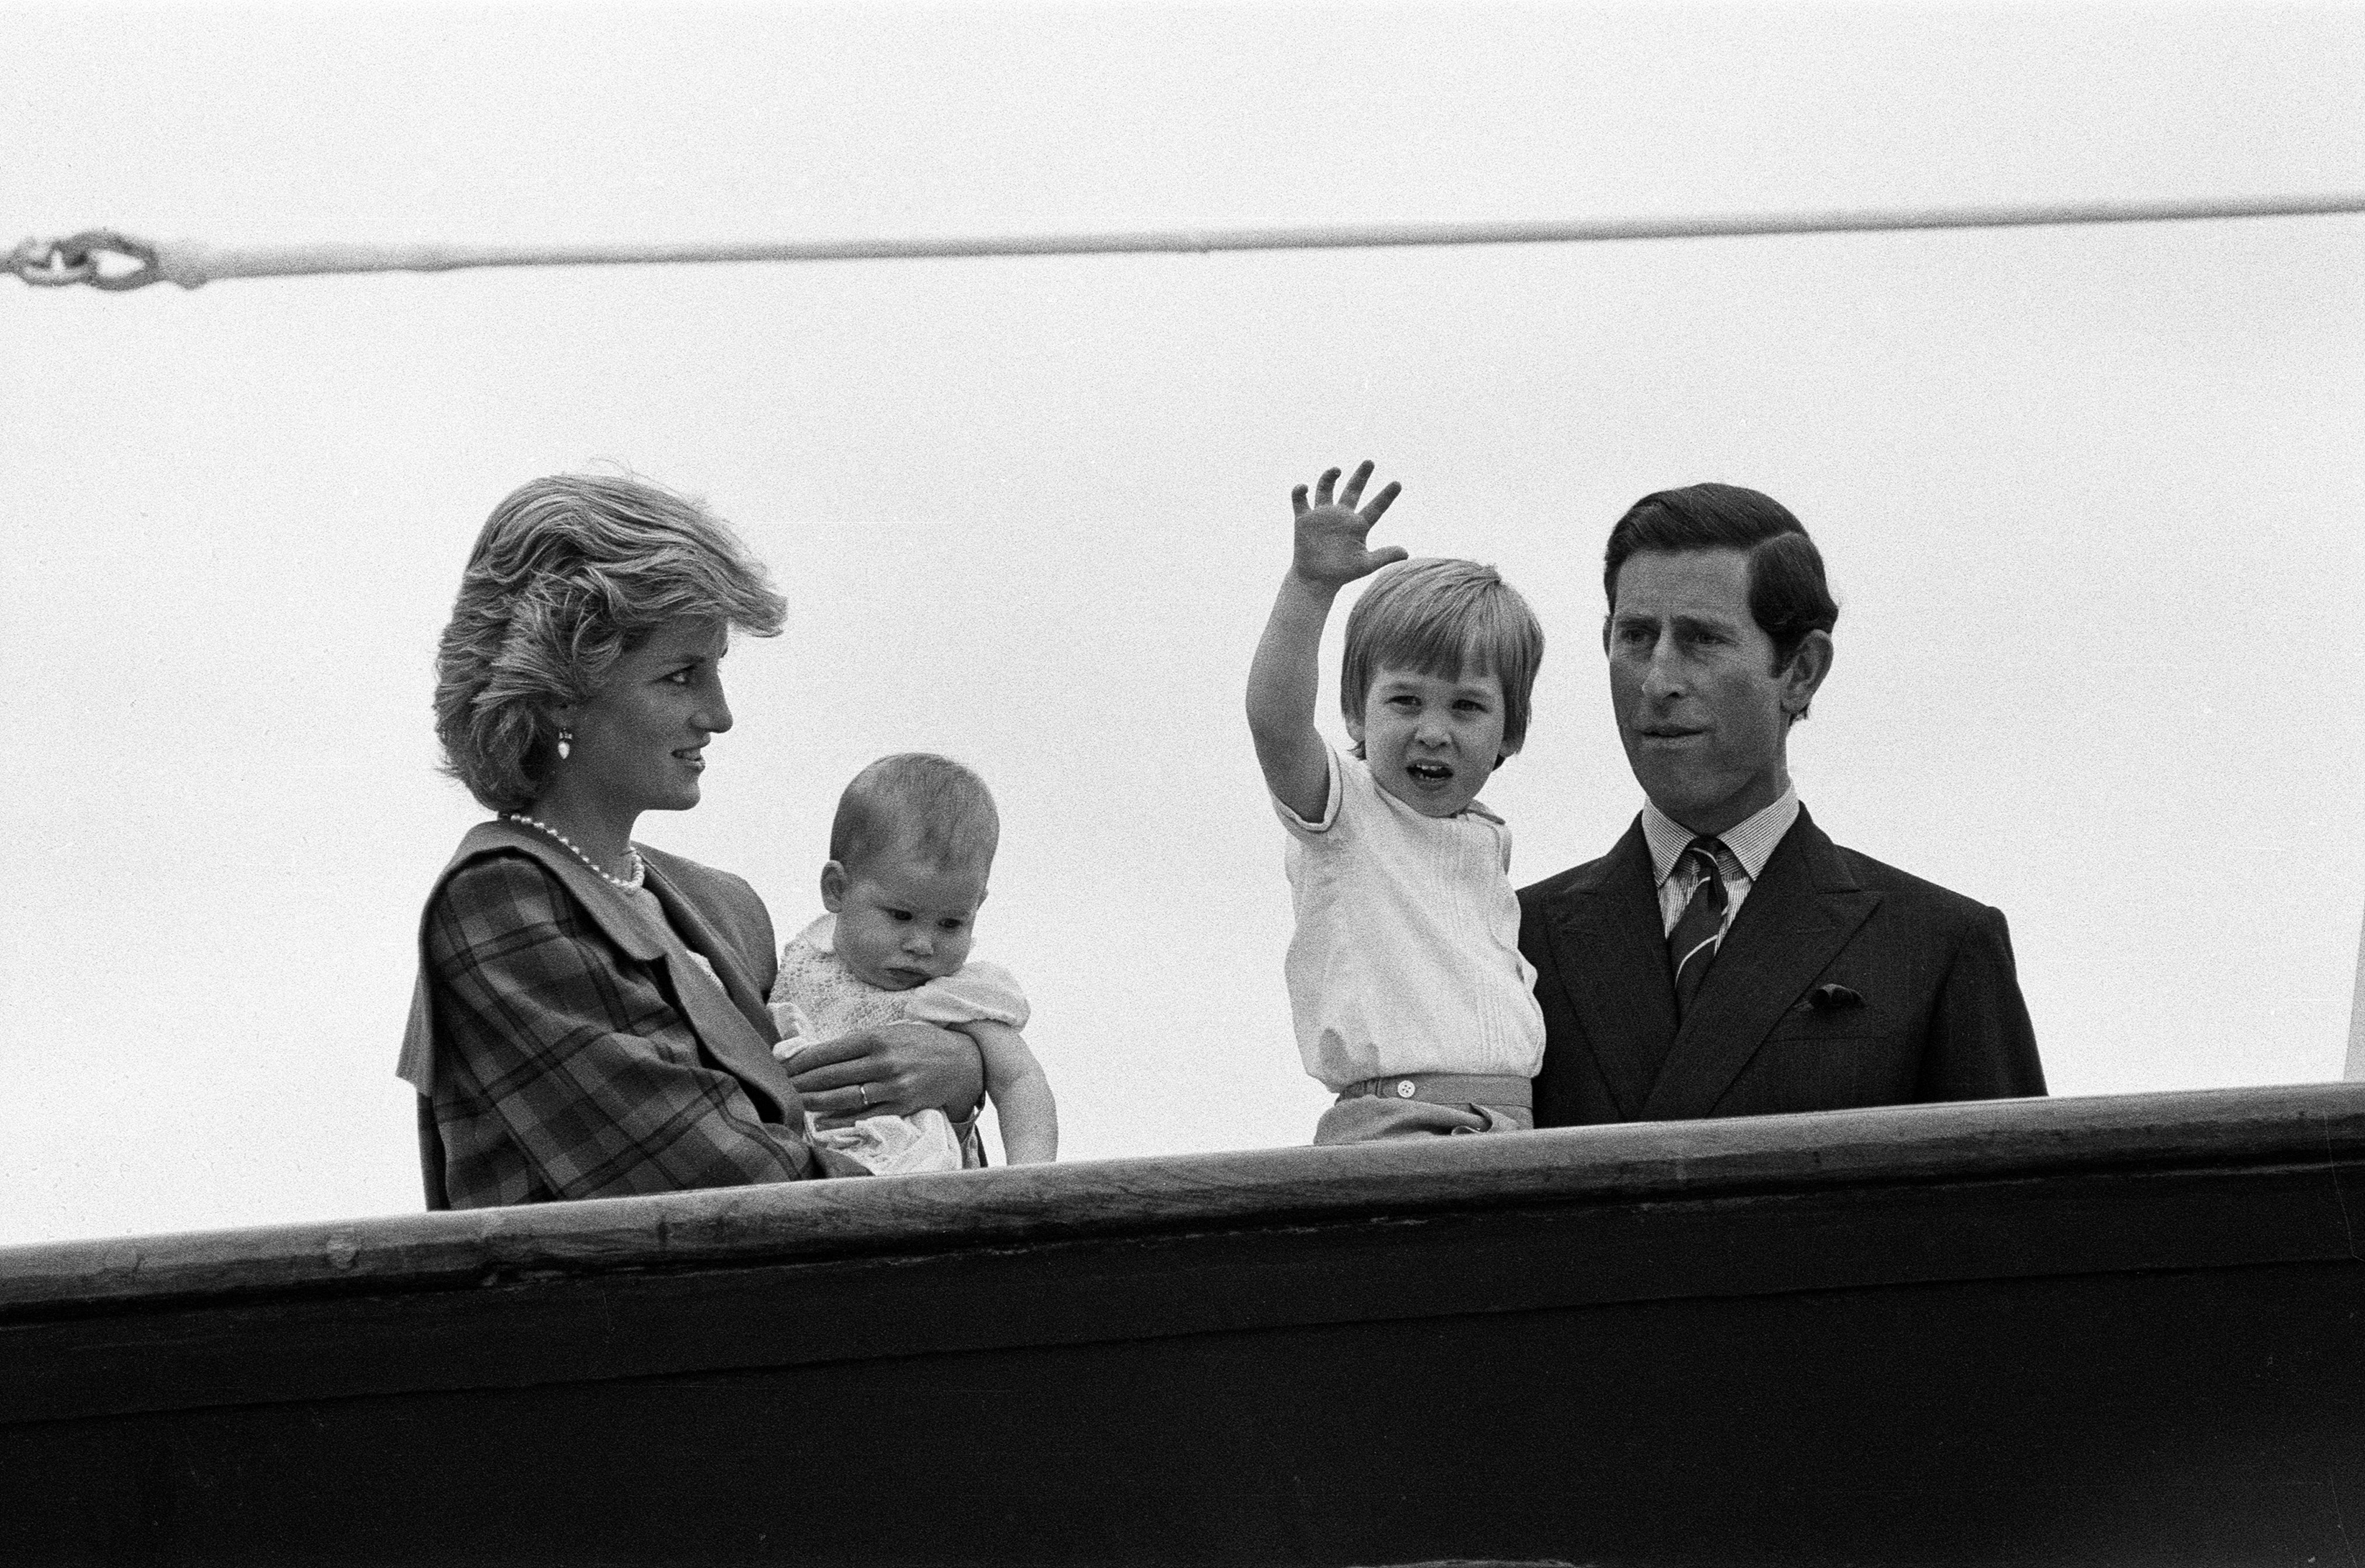 Prince Charles and Princess Diana reunited with their sons Prince William and Prince Harry aboard the Royal Yacht Britannia in Venice after touring Italy on May 5, 1985 | Source: Getty Images